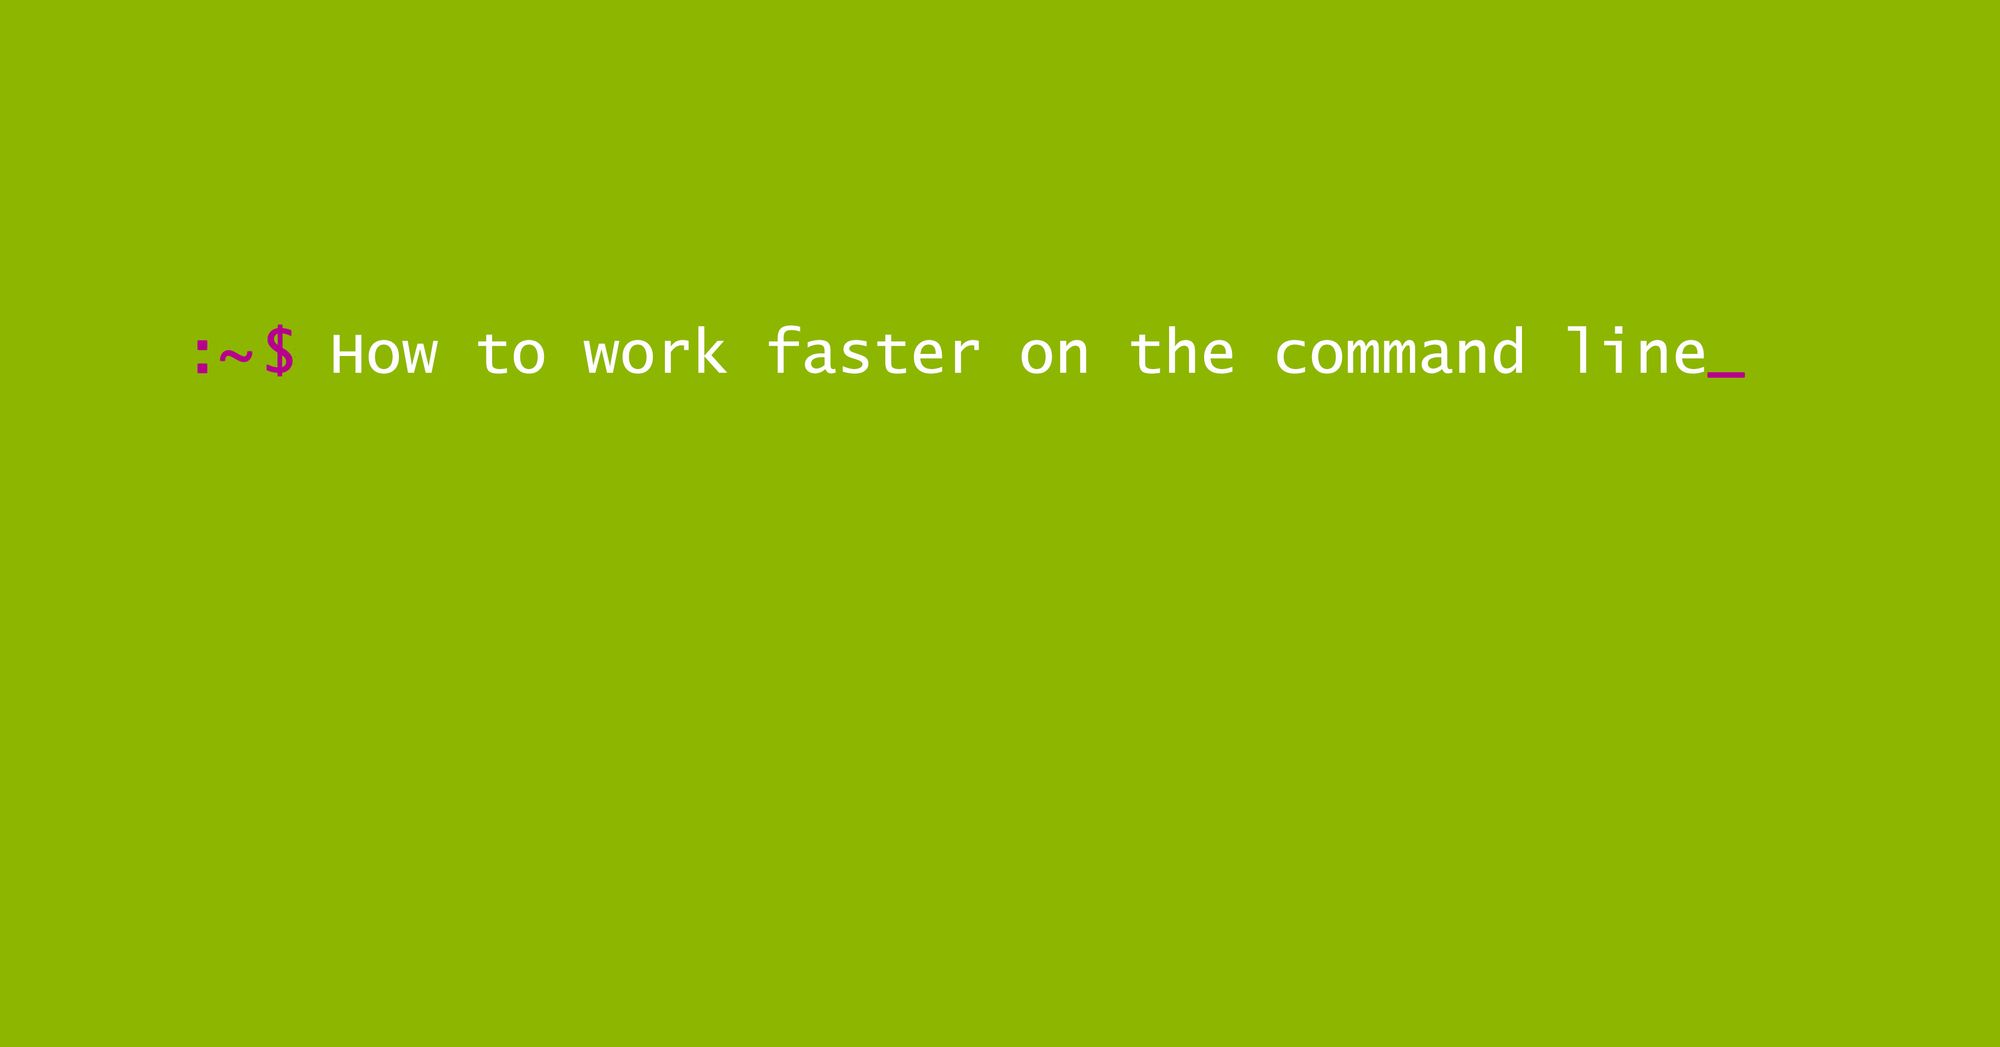 Bash Command Line Tips to Help You Work Faster